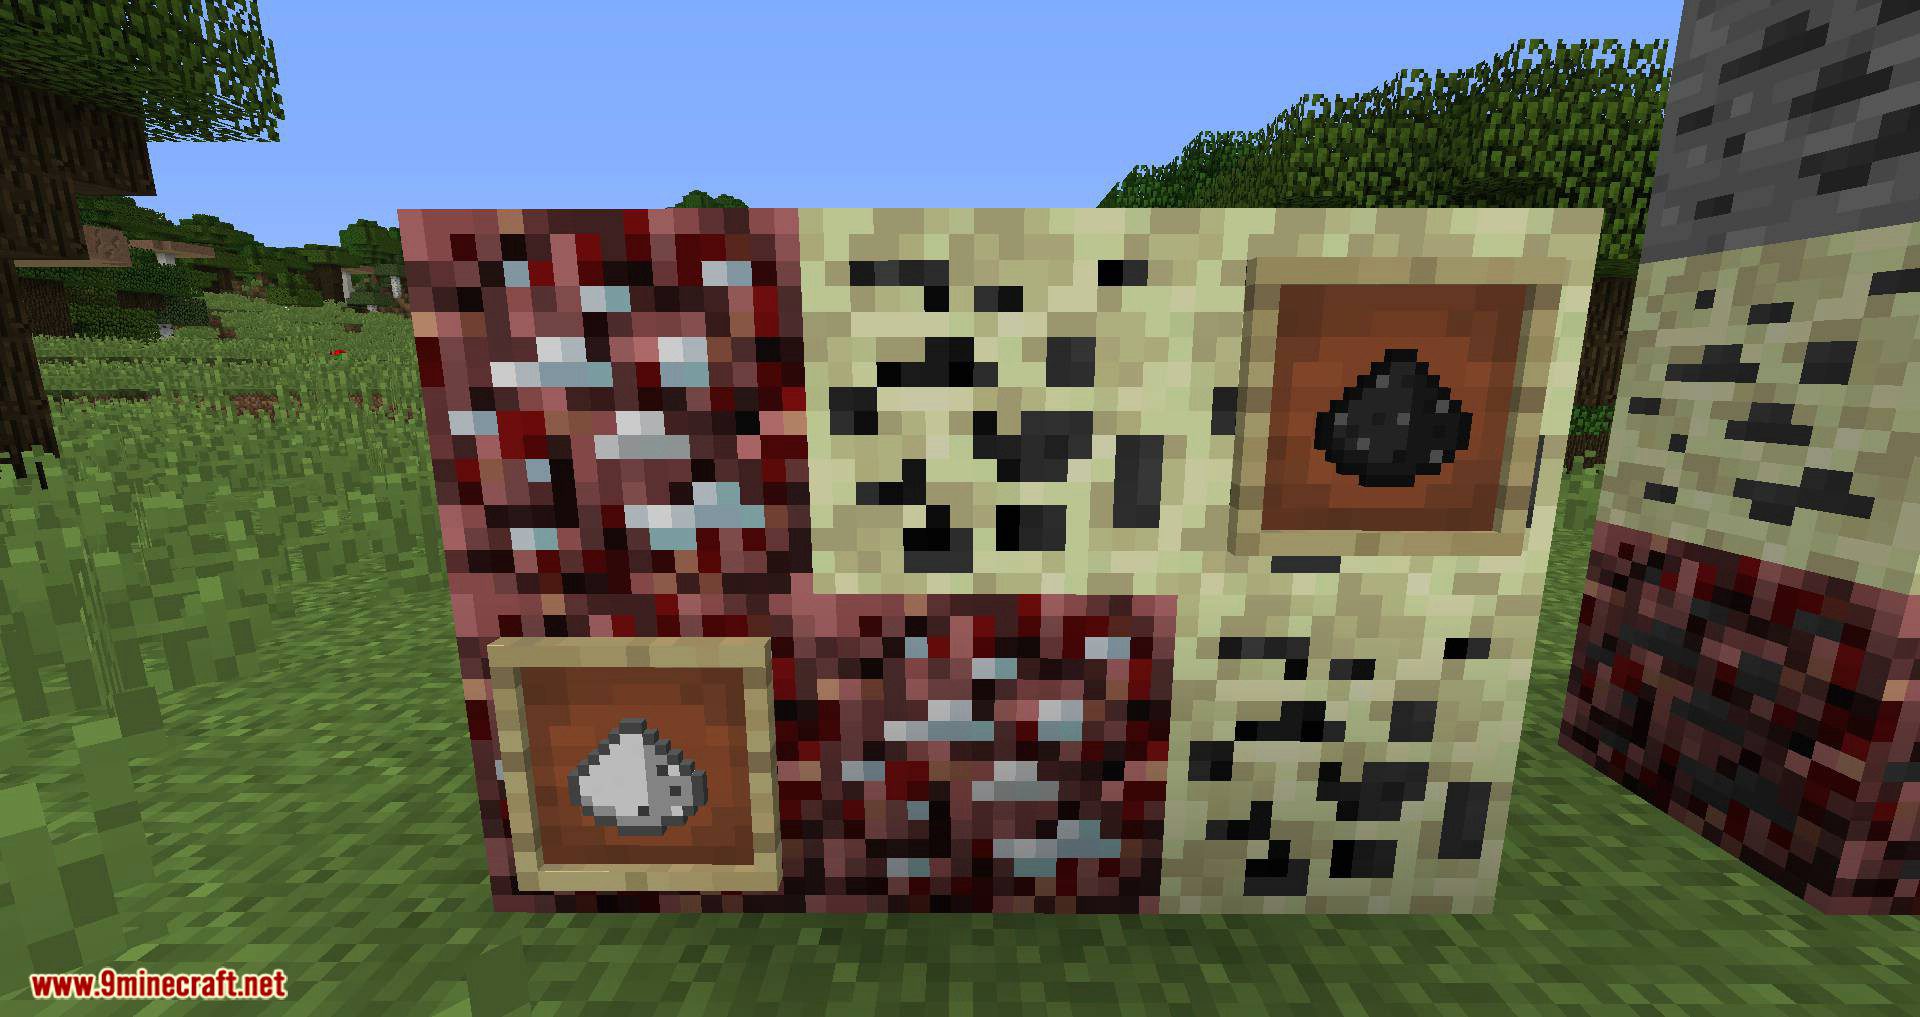 Pomarf_s Dimensional Ores mod for minecraft 06